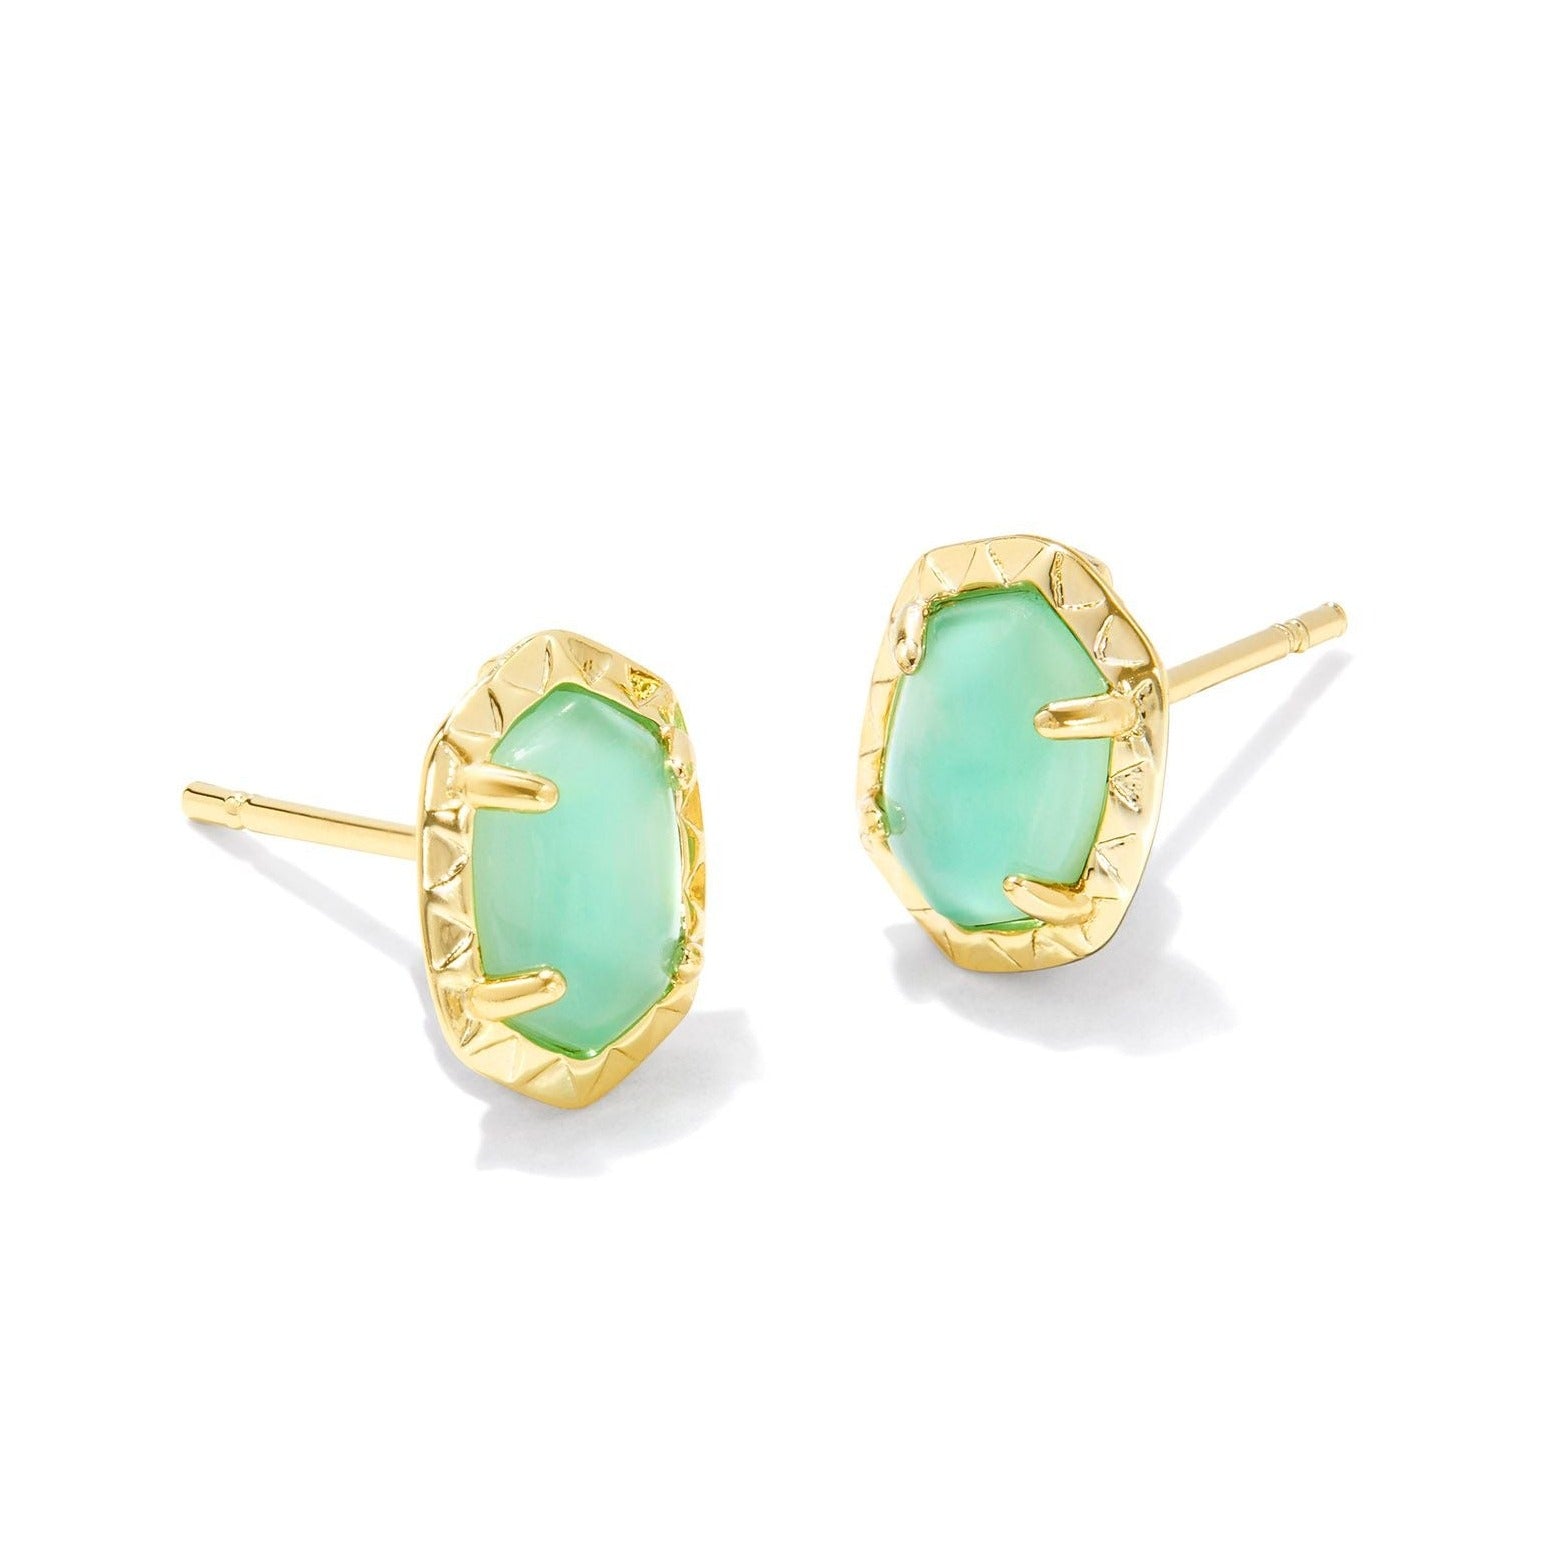 Kendra Scott | Daphne Gold Stud Earrings in Light Green Mother of Pearl - Giddy Up Glamour Boutique